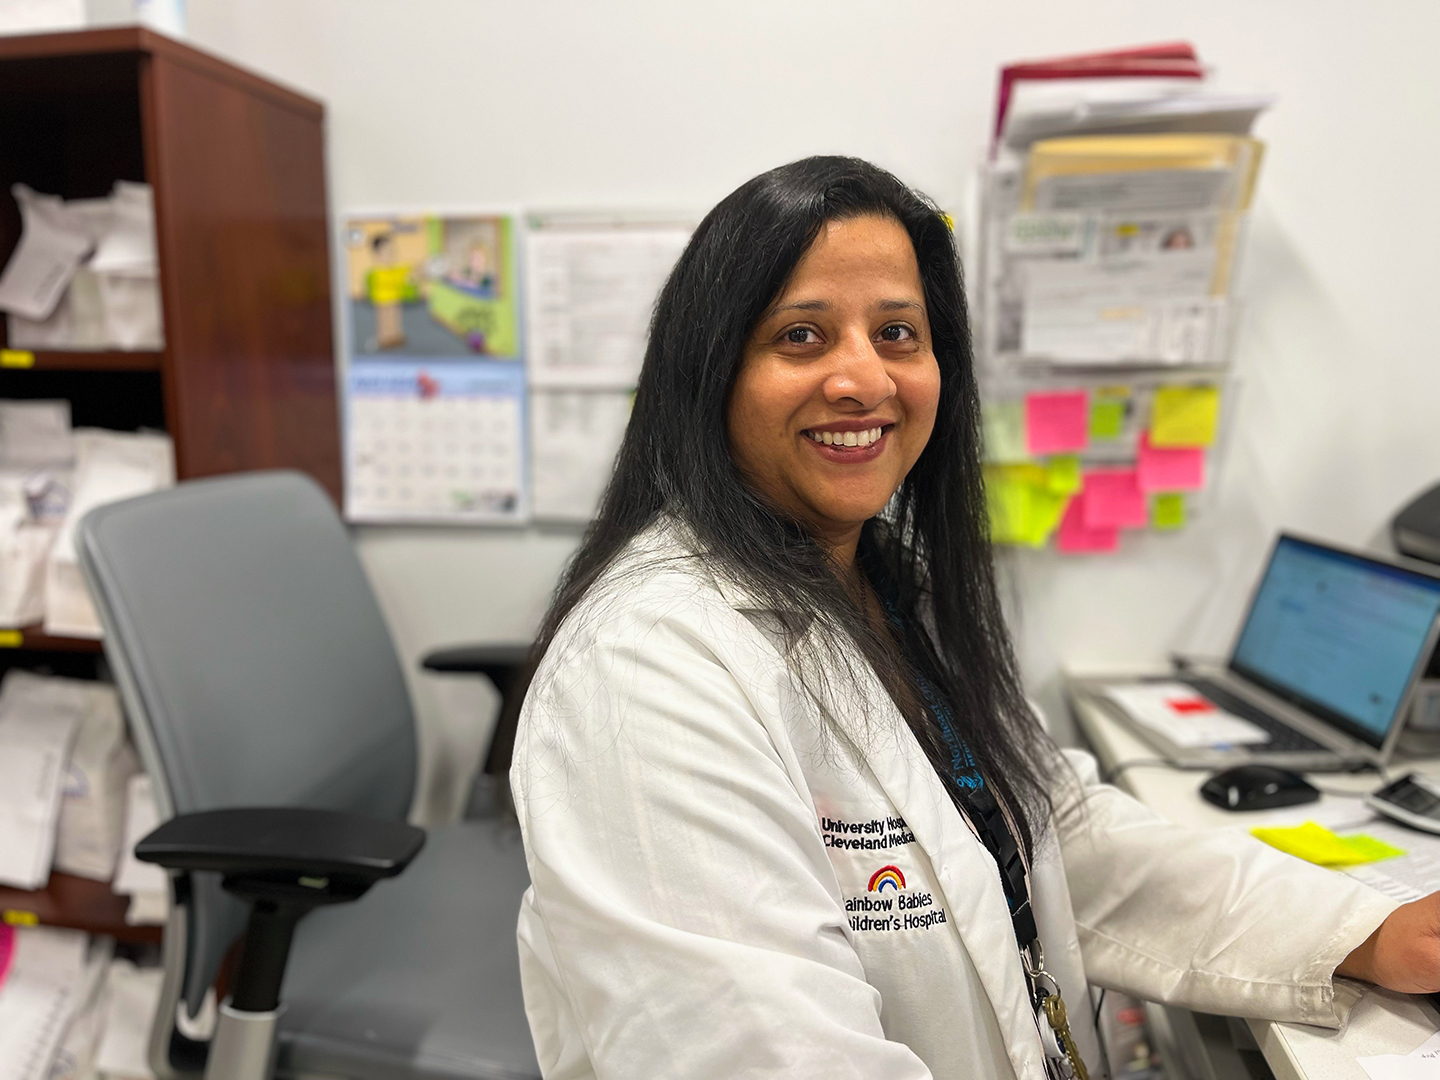 A photo of pharmacist Tanvi Jani sitting at her desk. She is wearing her white lab coat and has brown skin and long, dark hair.